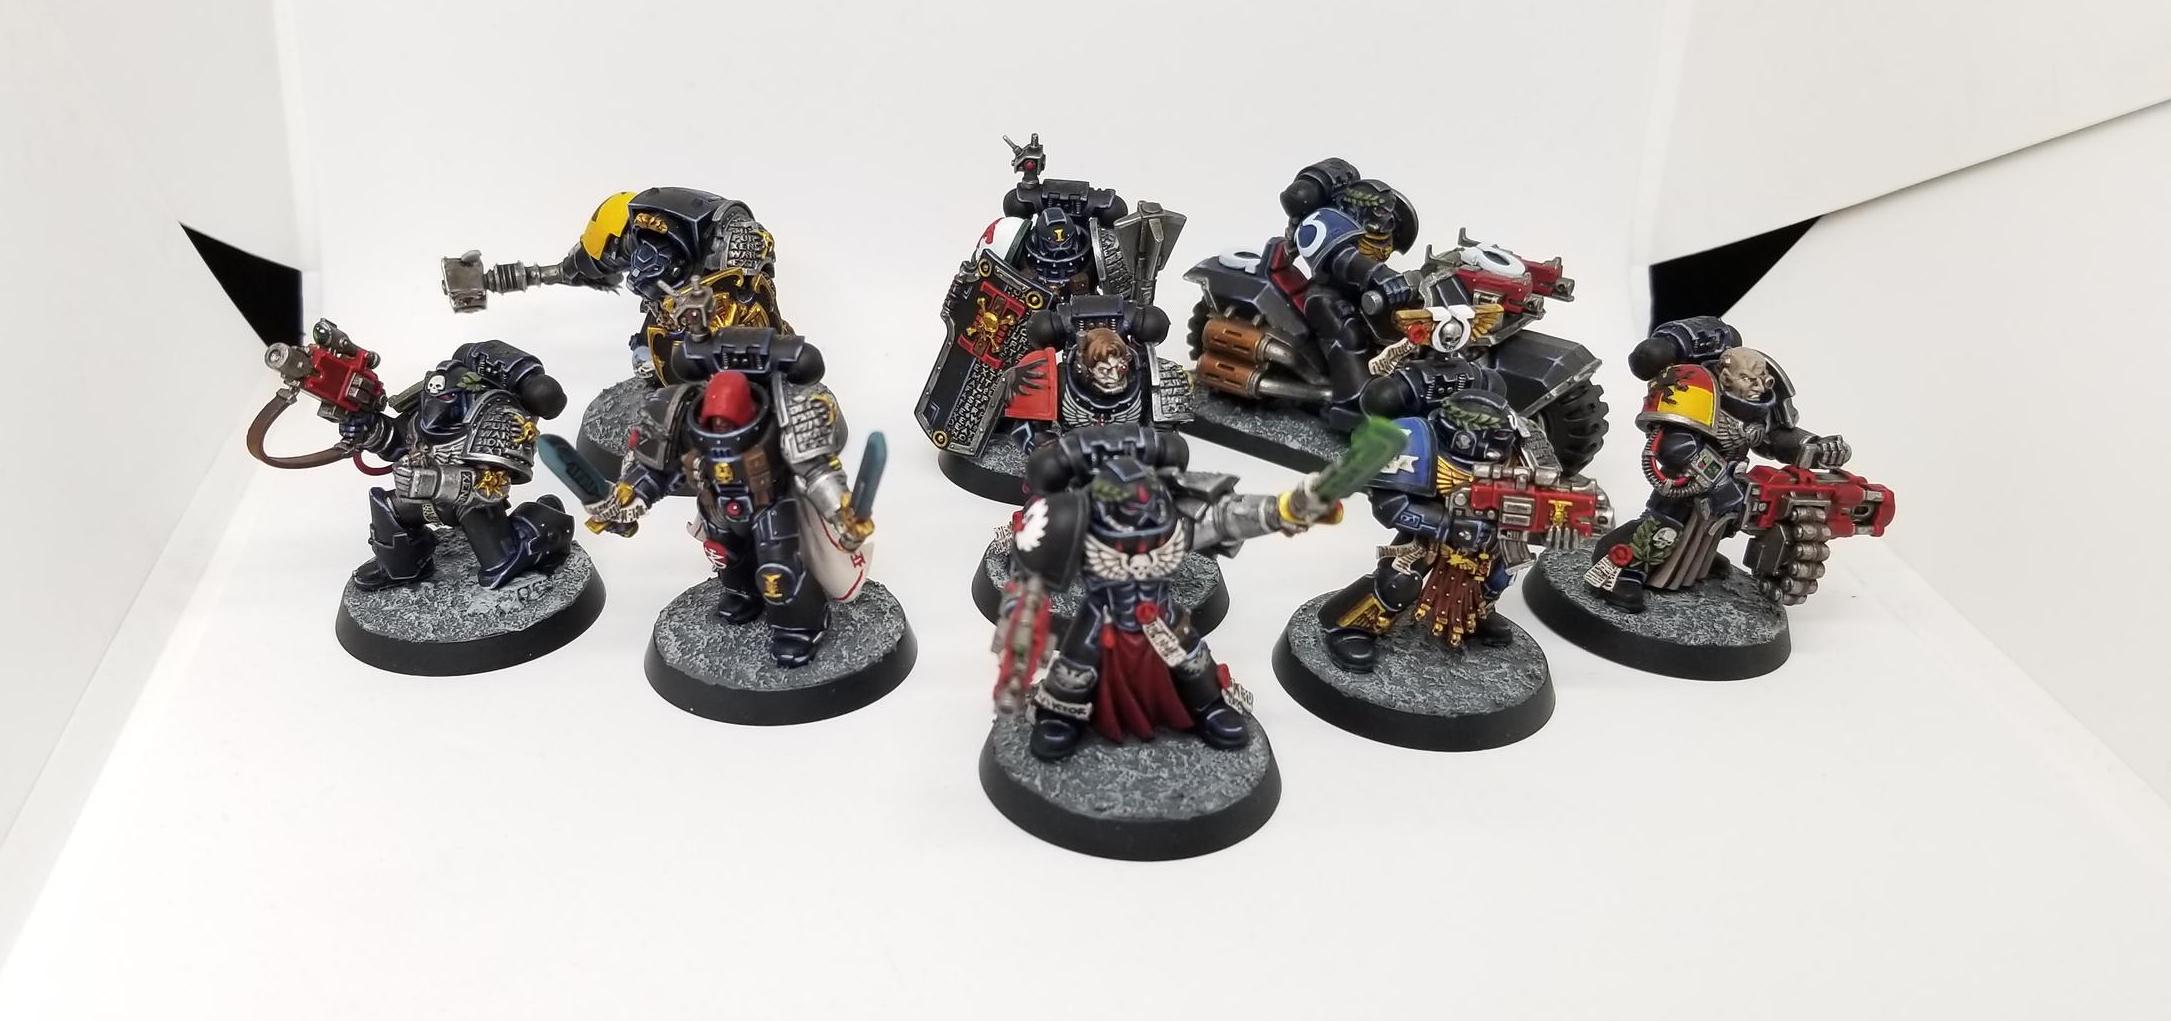 WARHAMMER 40K SPACE MARINE DEATHWATCH ARMY MANY UNITS TO CHOOSE FROM 